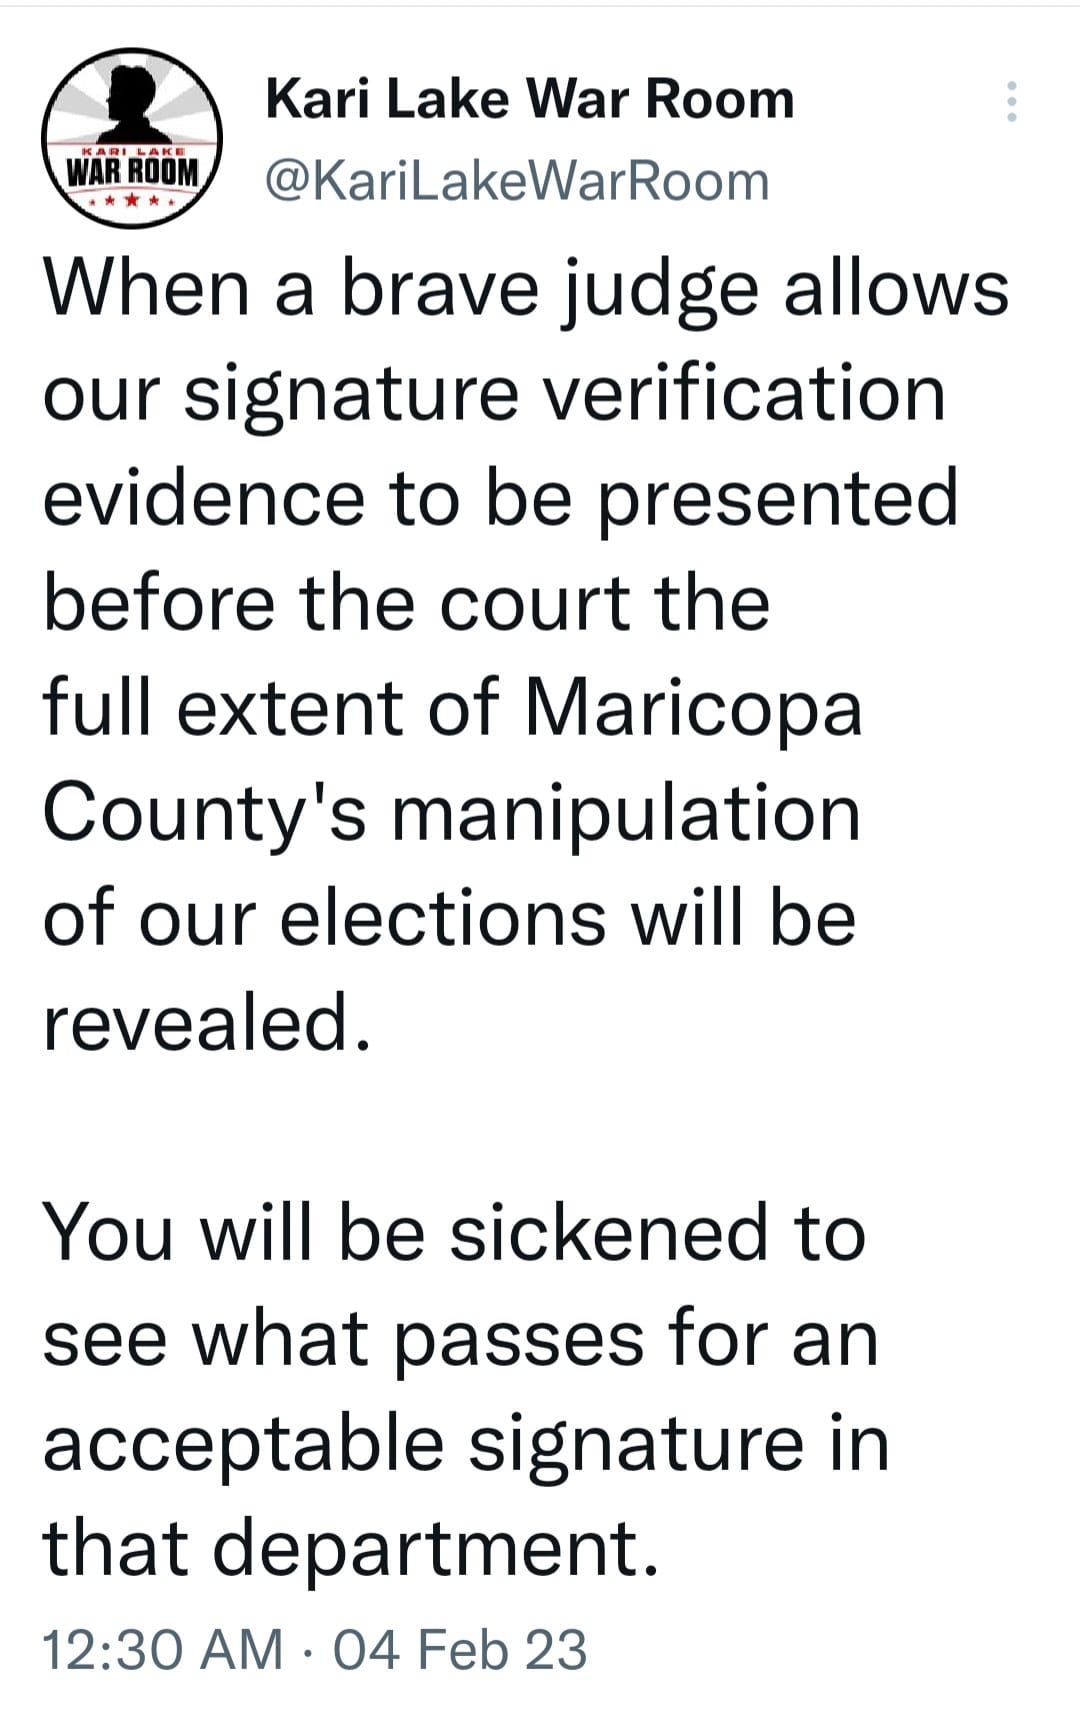 May be an image of text that says 'Kari Lake War Room @KariLakeWarRoom When a brave judge allows our signature verification evidence to be presented before the court the full extent of Maricopa County's manipulation of our elections will be revealed. You will be sickened to see what passes for an acceptable signature in that department. 12:30 AM 04 Feb 23'